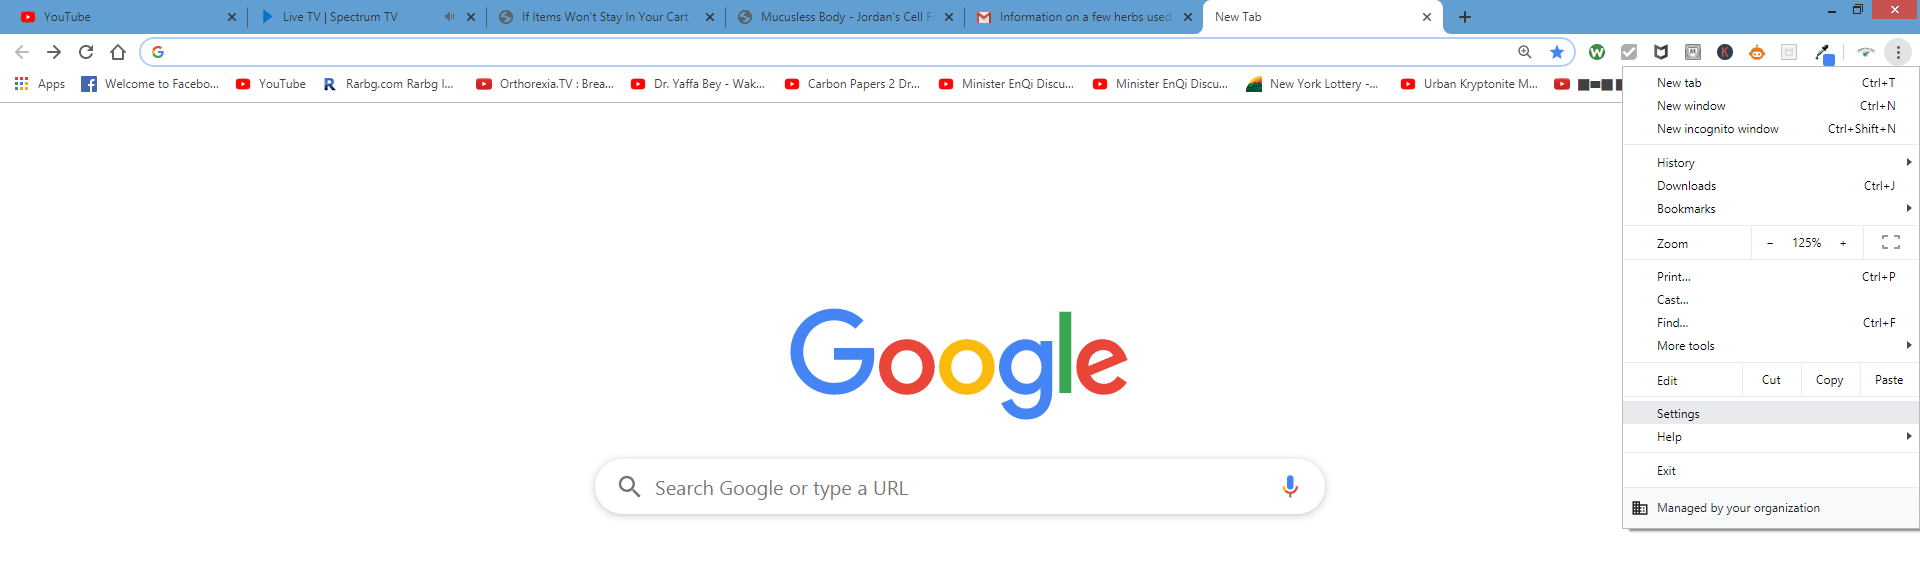 Google Browser Clearing